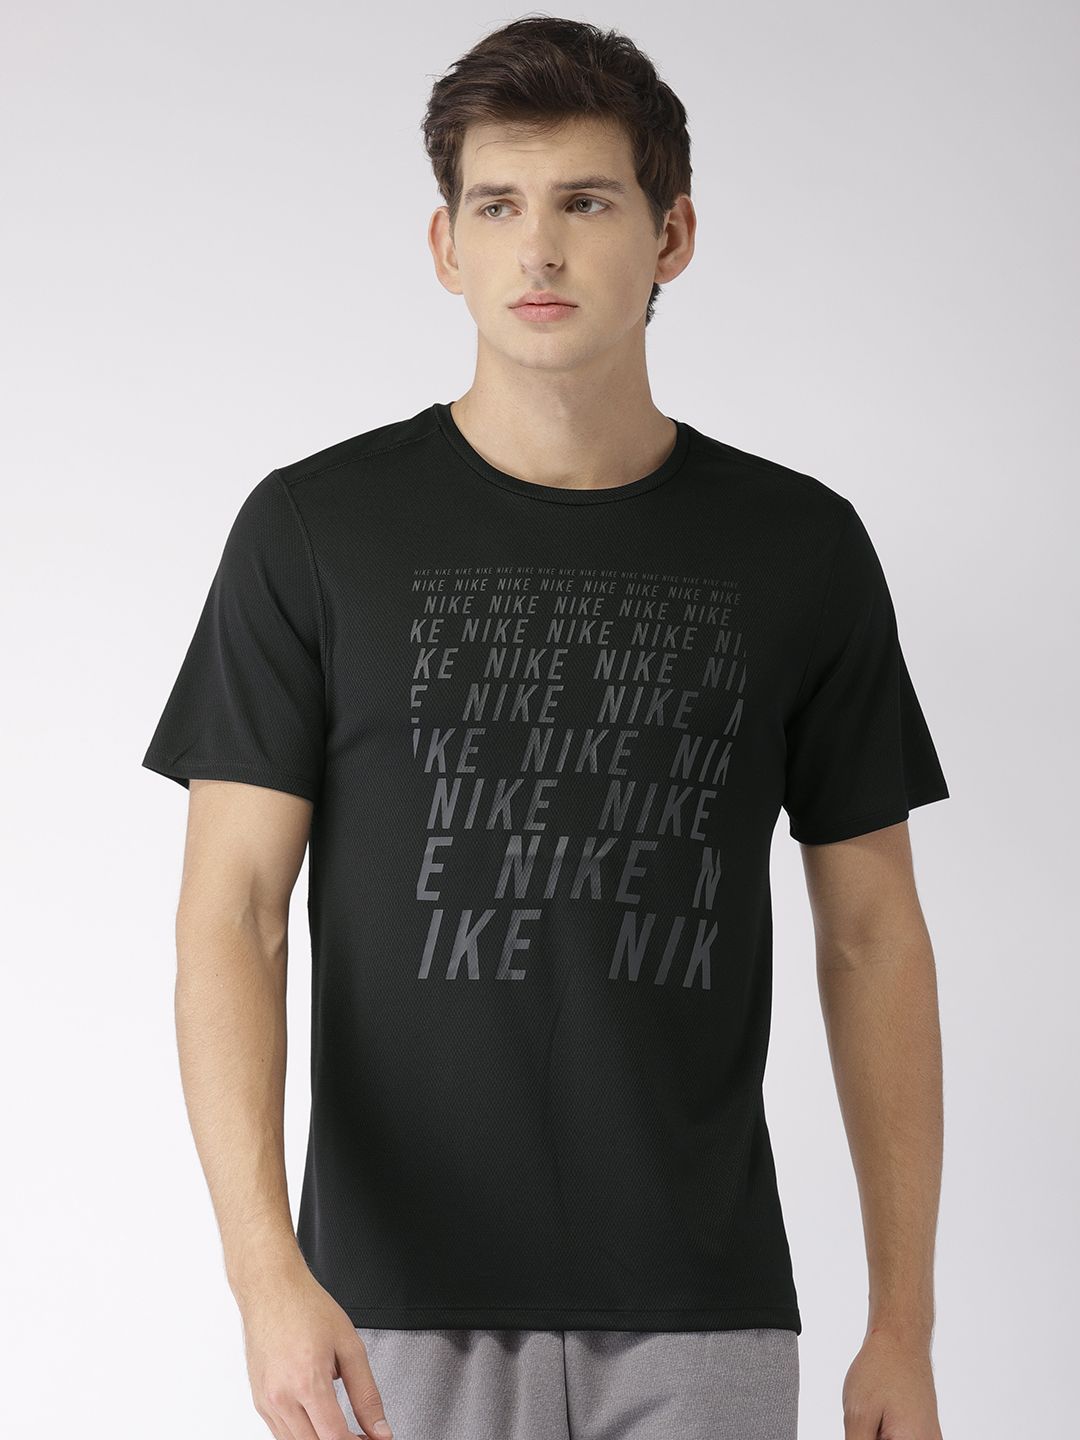 Buy > nike shirts for men with sayings > in stock